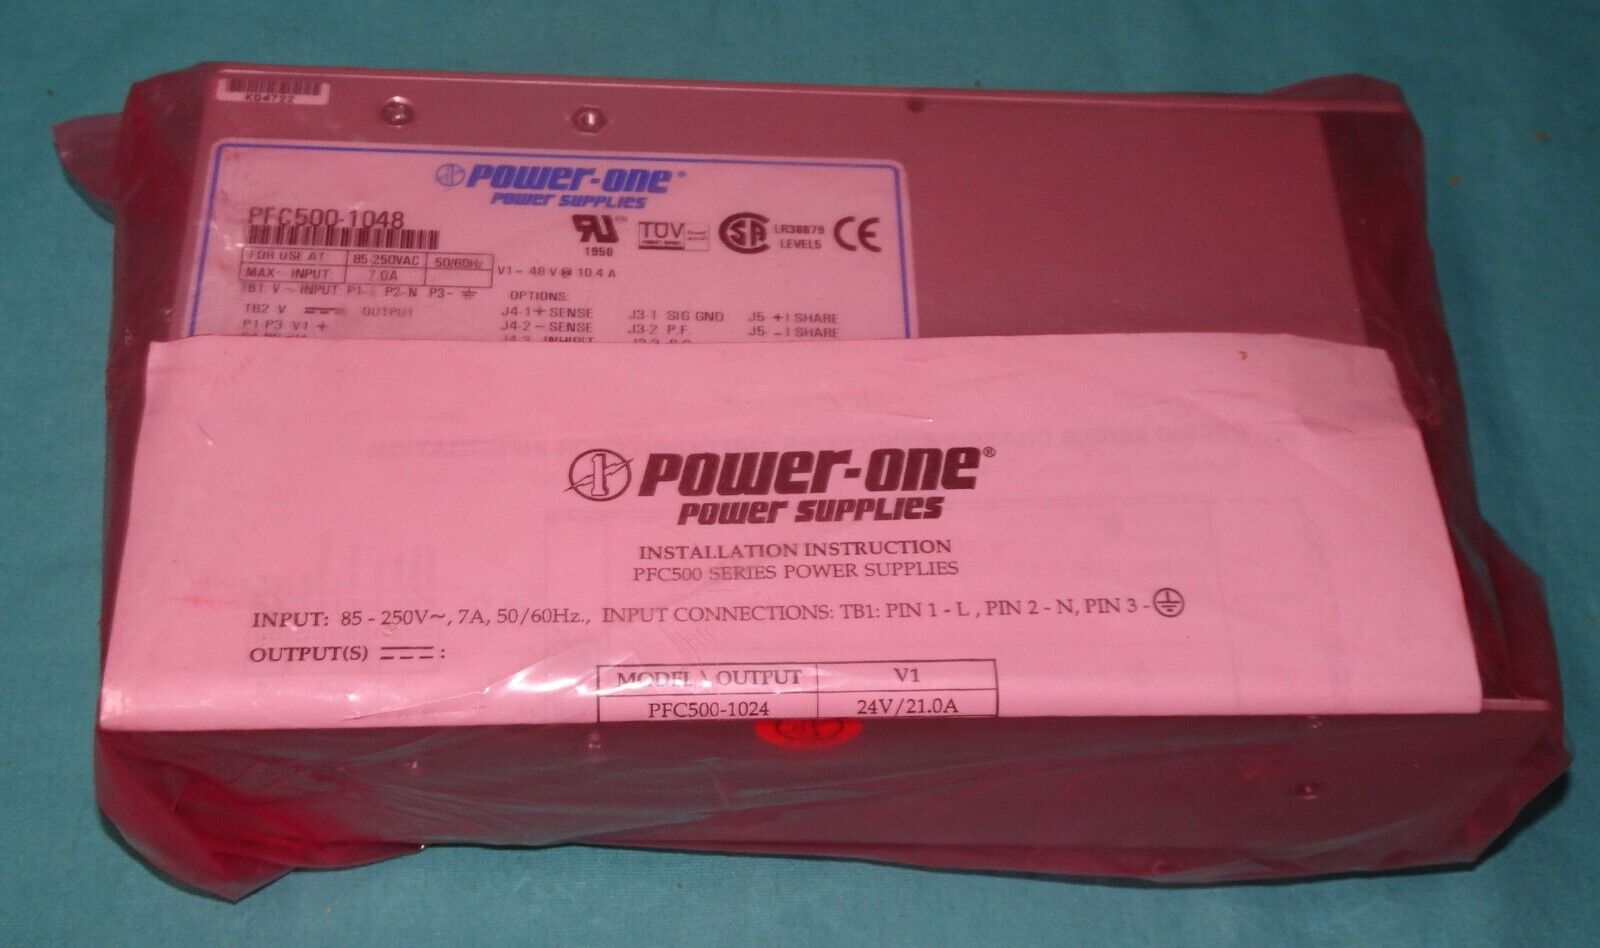 NEW / WITHOUT BOX UNUSED = Power One PFC500-1048 = Power supply